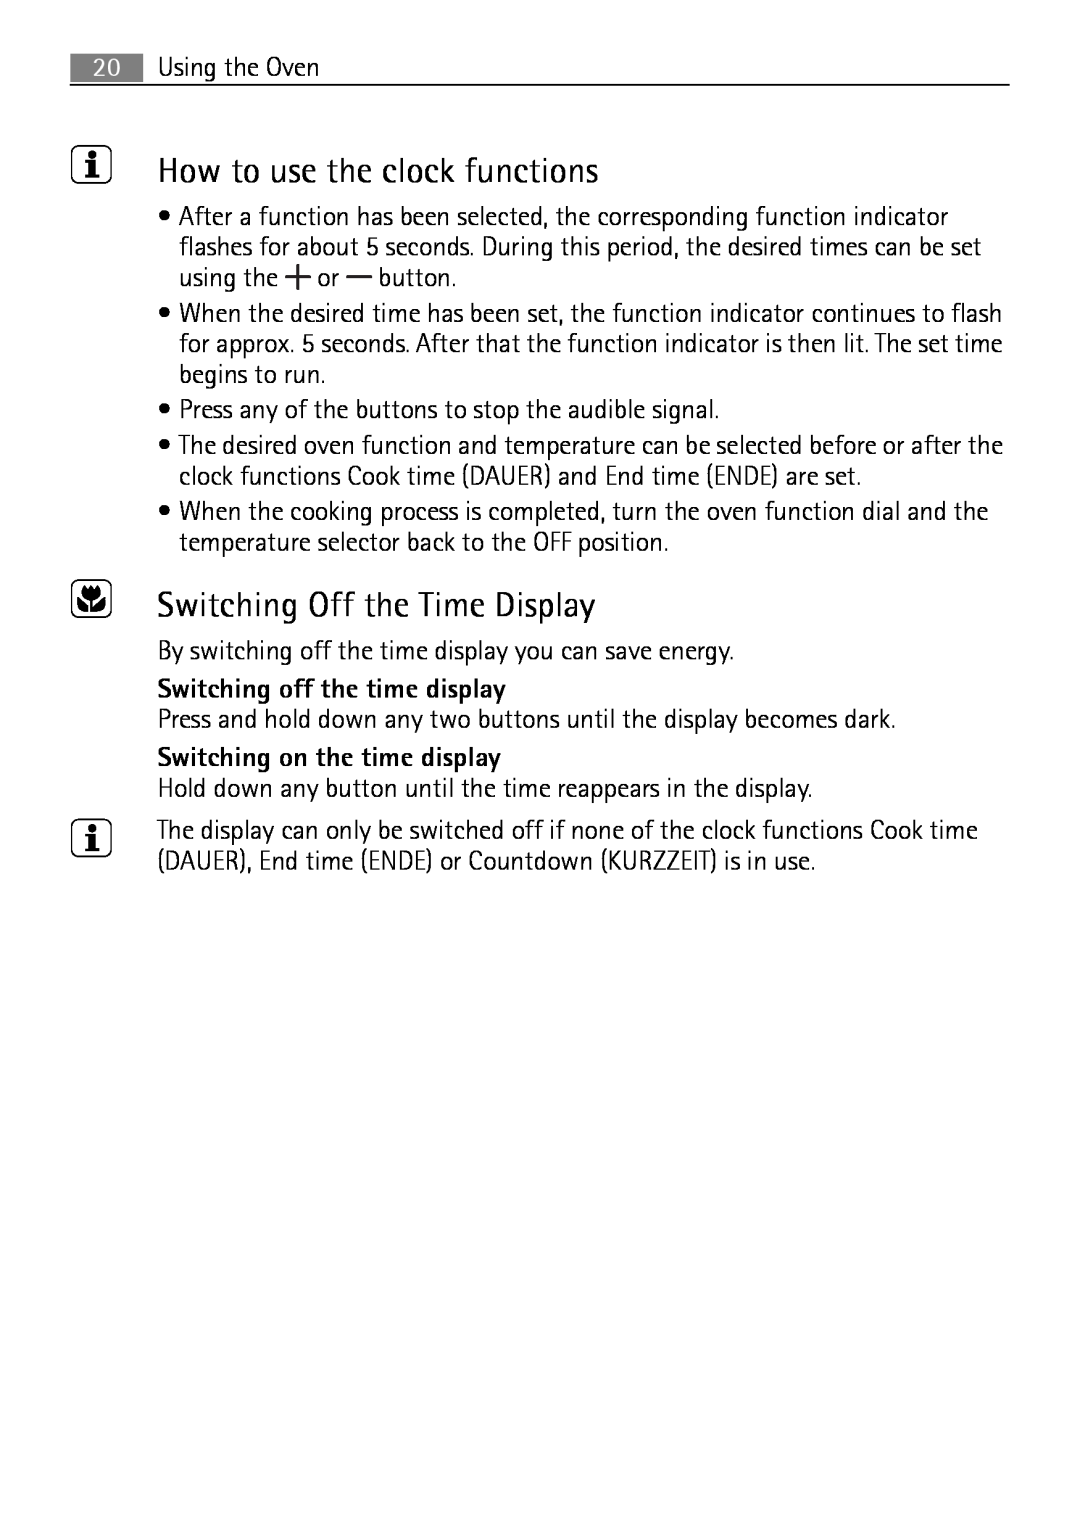 Electrolux E43012-5 How to use the clock functions, Switching Off the Time Display, Switching off the time display 